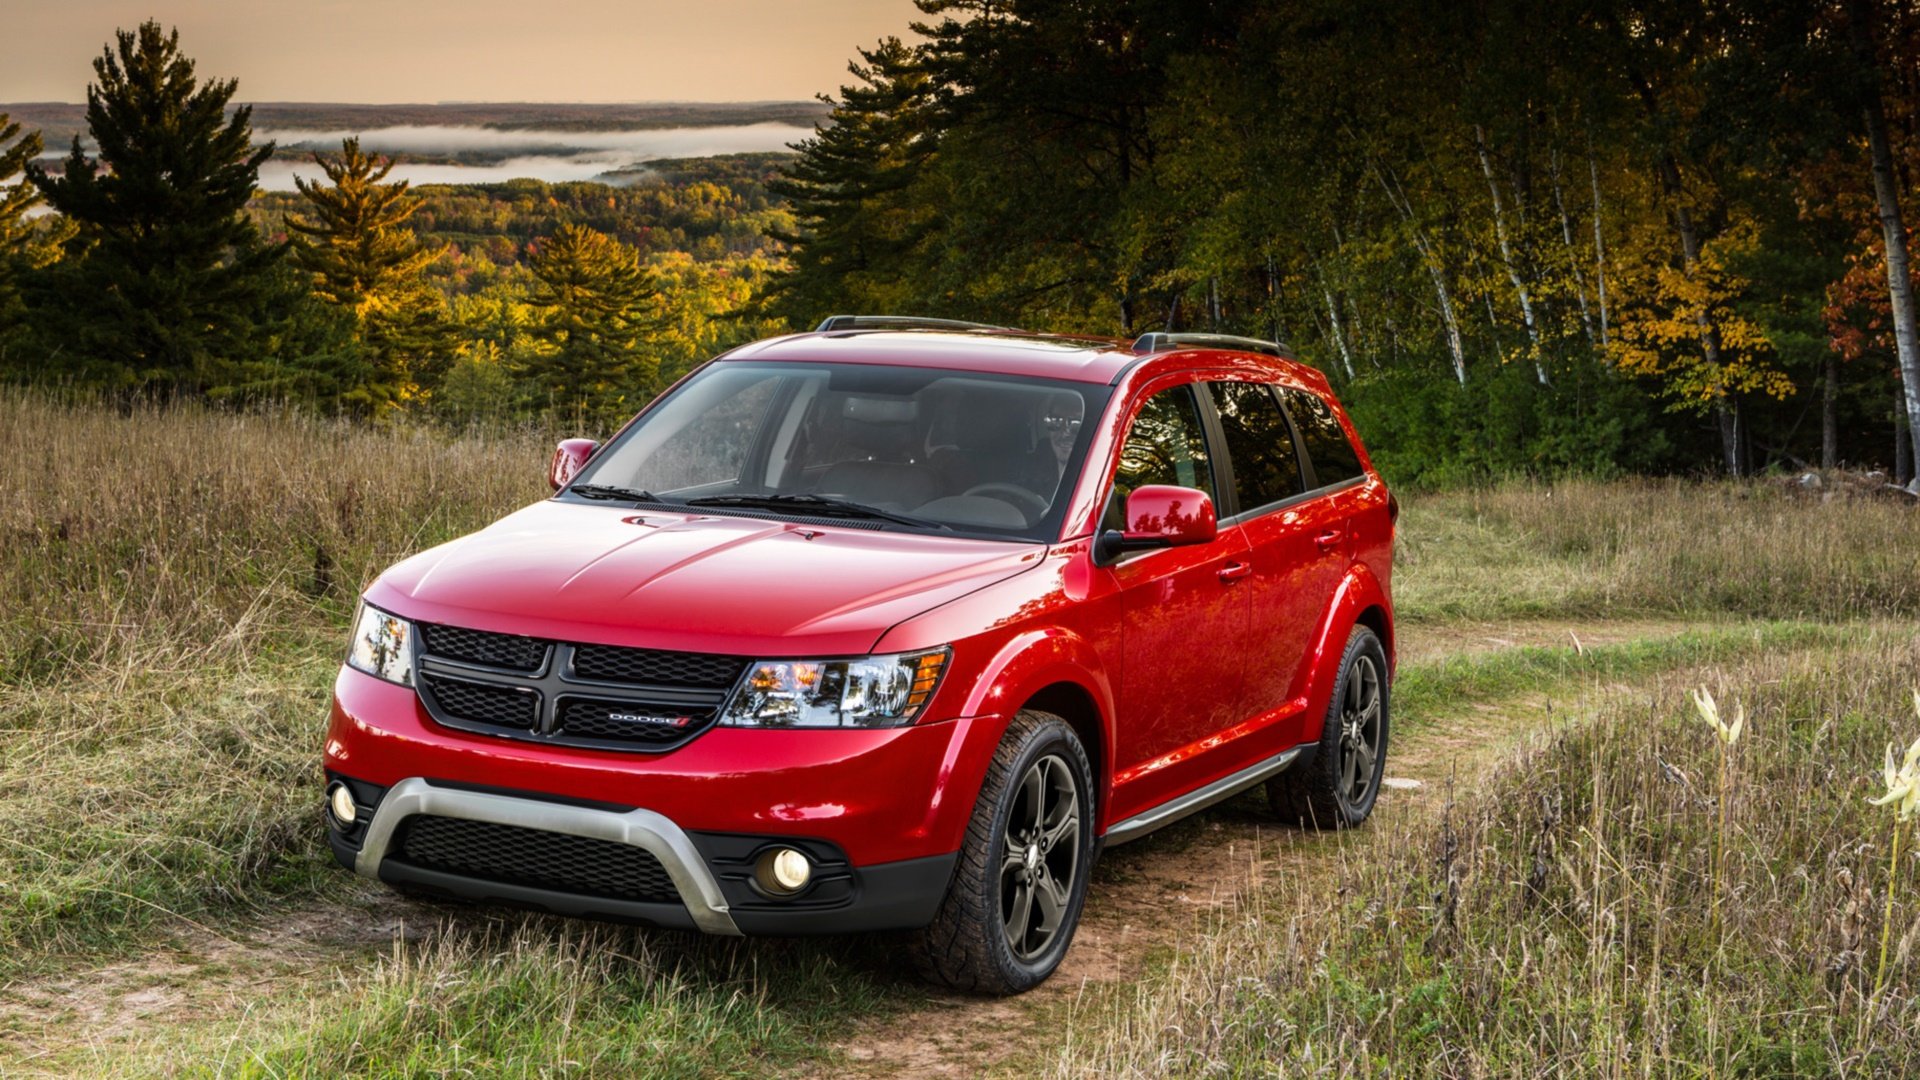 Download full hd 1080p Dodge Journey PC background ID:81658 for free